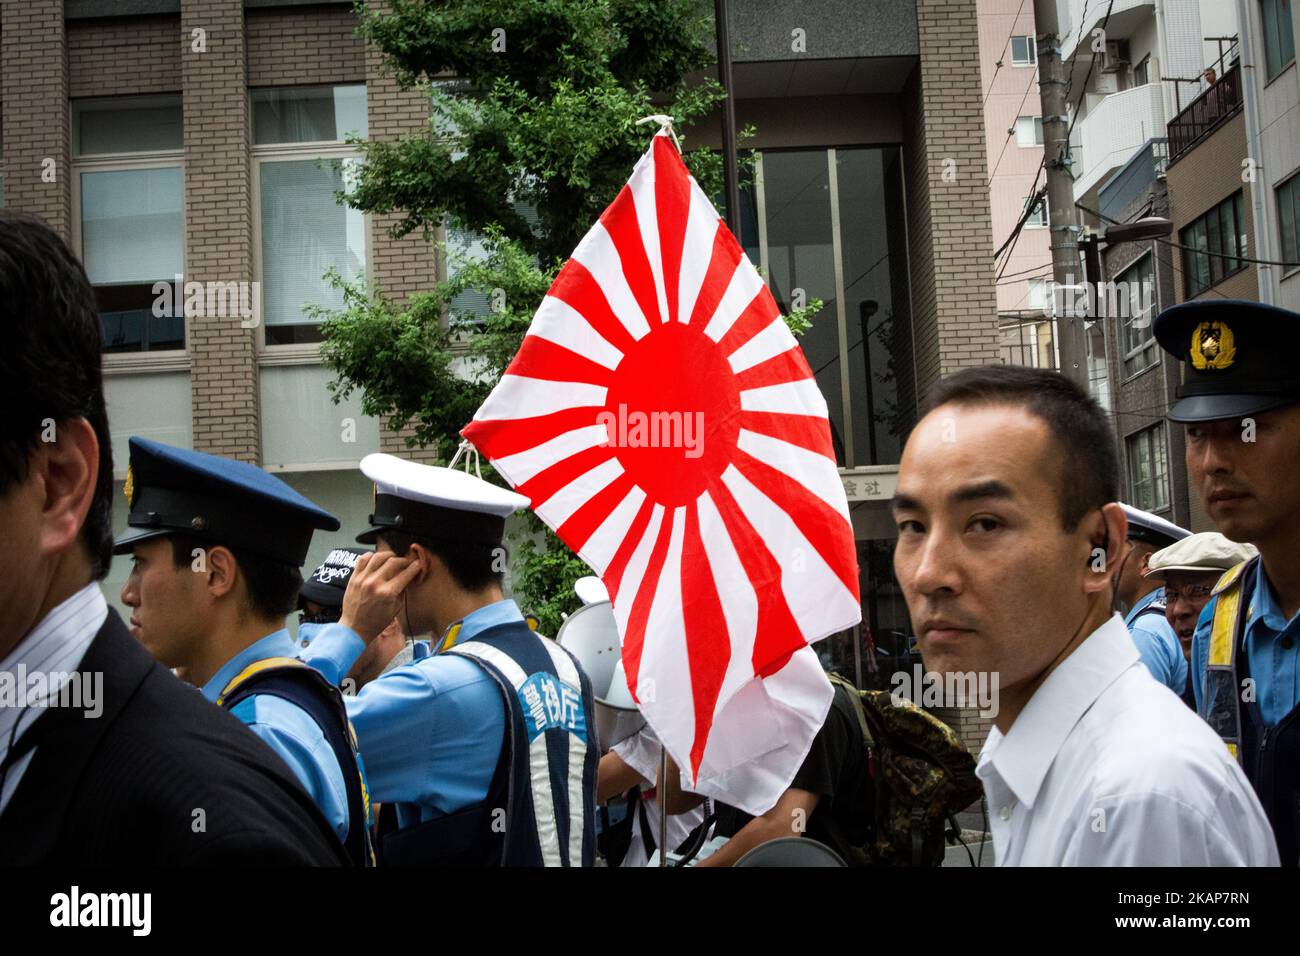 Japanese nationalists holding Japanese maritime flags, escorted by police, took to the streets in a 'hate demonstration' in Akihabara, Tokyo, Japan on July 16, 2017. The nationalists faced off with anti-racist groups who mounted counter protests demanding an end to hate speech and racism in Japan. (Photo by Richard Atrero de Guzman/NUR Photo) *** Please Use Credit from Credit Field *** Stock Photo